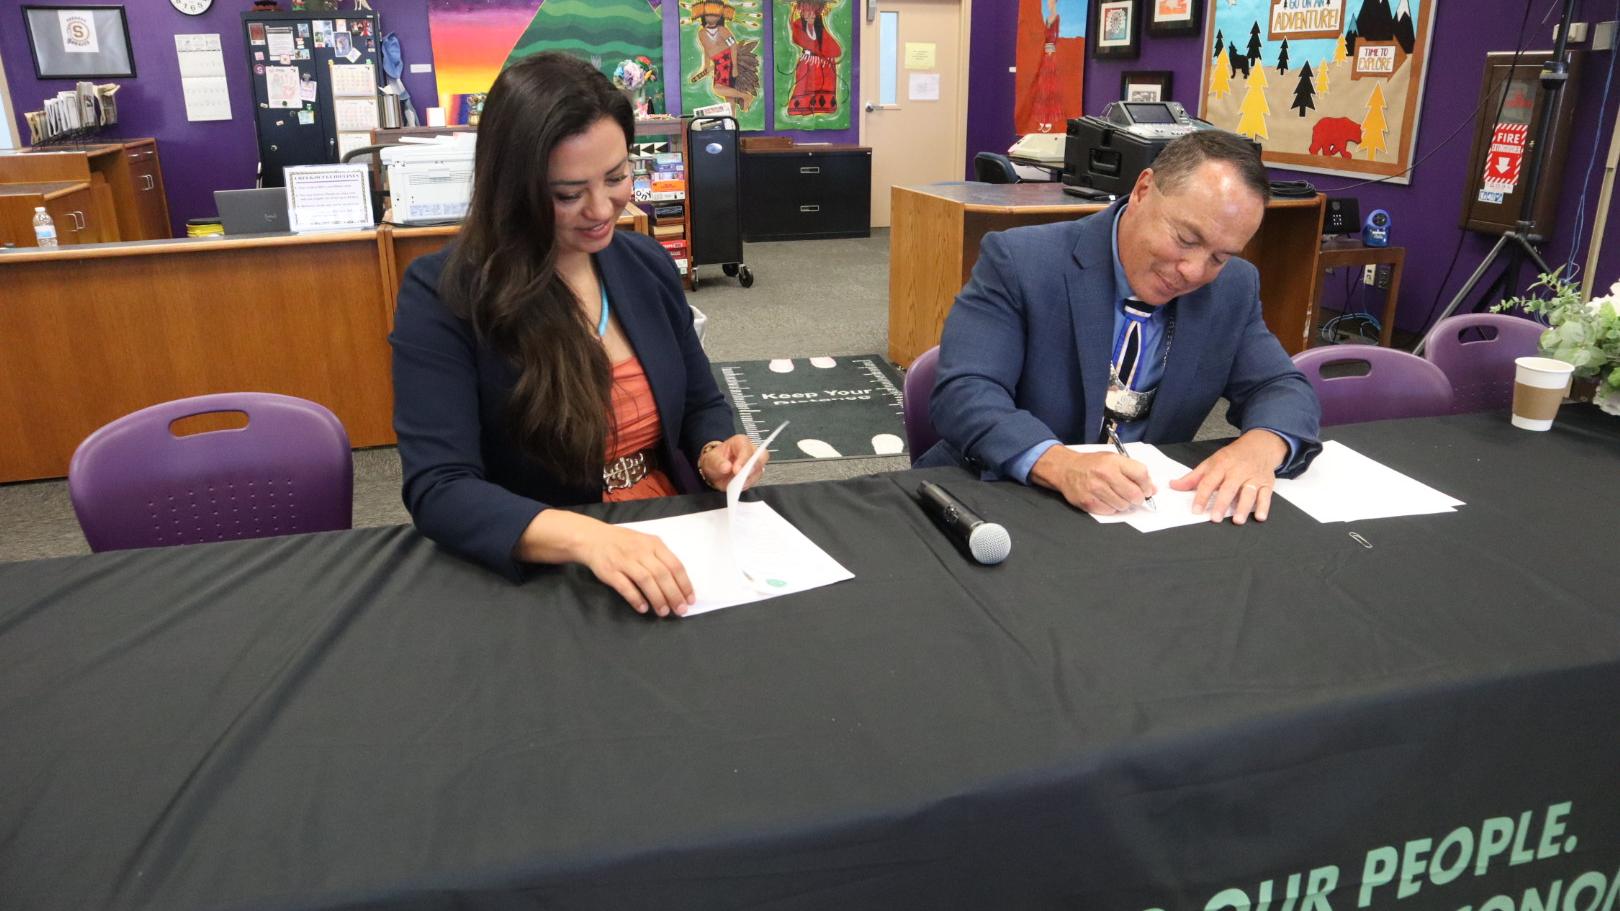 Signing of a new agreement for BIE schools and students.